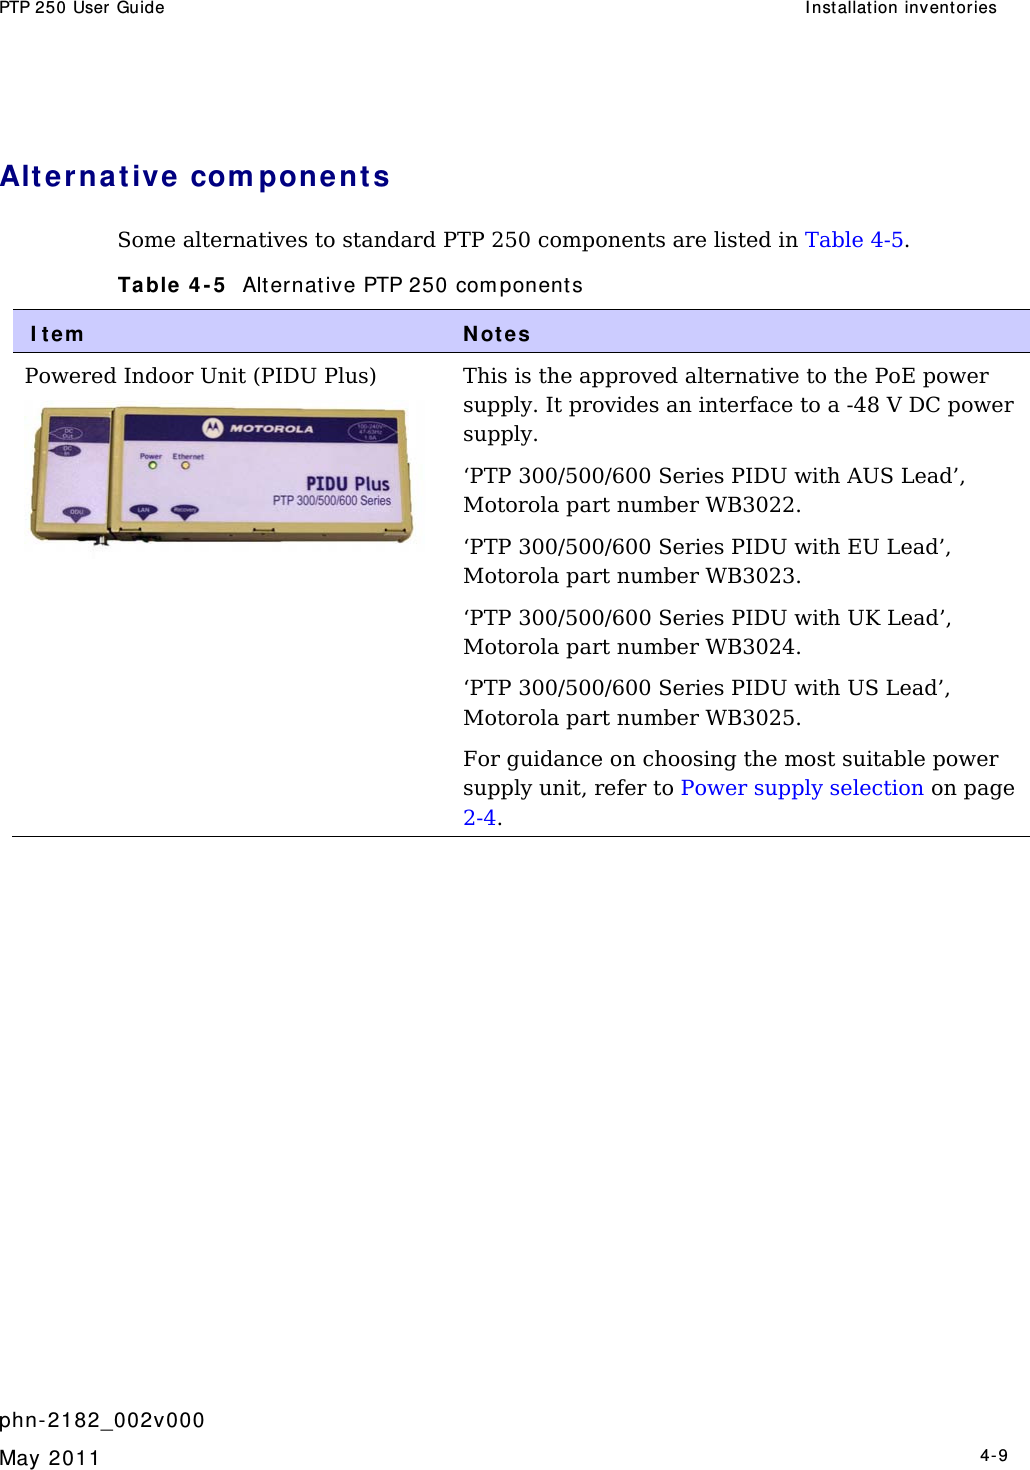 PTP 250 User Guide  I nst allation invent ories   phn- 2182_002v000   May 2011   4-9  Alt erna t ive  com ponent s Some alternatives to standard PTP 250 components are listed in Table 4-5. Table  4 - 5   Alt ernat ive PTP 250 com ponent s I te m   N ot es Powered Indoor Unit (PIDU Plus)  This is the approved alternative to the PoE power supply. It provides an interface to a -48 V DC power supply. ‘PTP 300/500/600 Series PIDU with AUS Lead’,  Motorola part number WB3022. ‘PTP 300/500/600 Series PIDU with EU Lead’,  Motorola part number WB3023. ‘PTP 300/500/600 Series PIDU with UK Lead’,  Motorola part number WB3024. ‘PTP 300/500/600 Series PIDU with US Lead’,  Motorola part number WB3025. For guidance on choosing the most suitable power supply unit, refer to Power supply selection on page 2-4.     